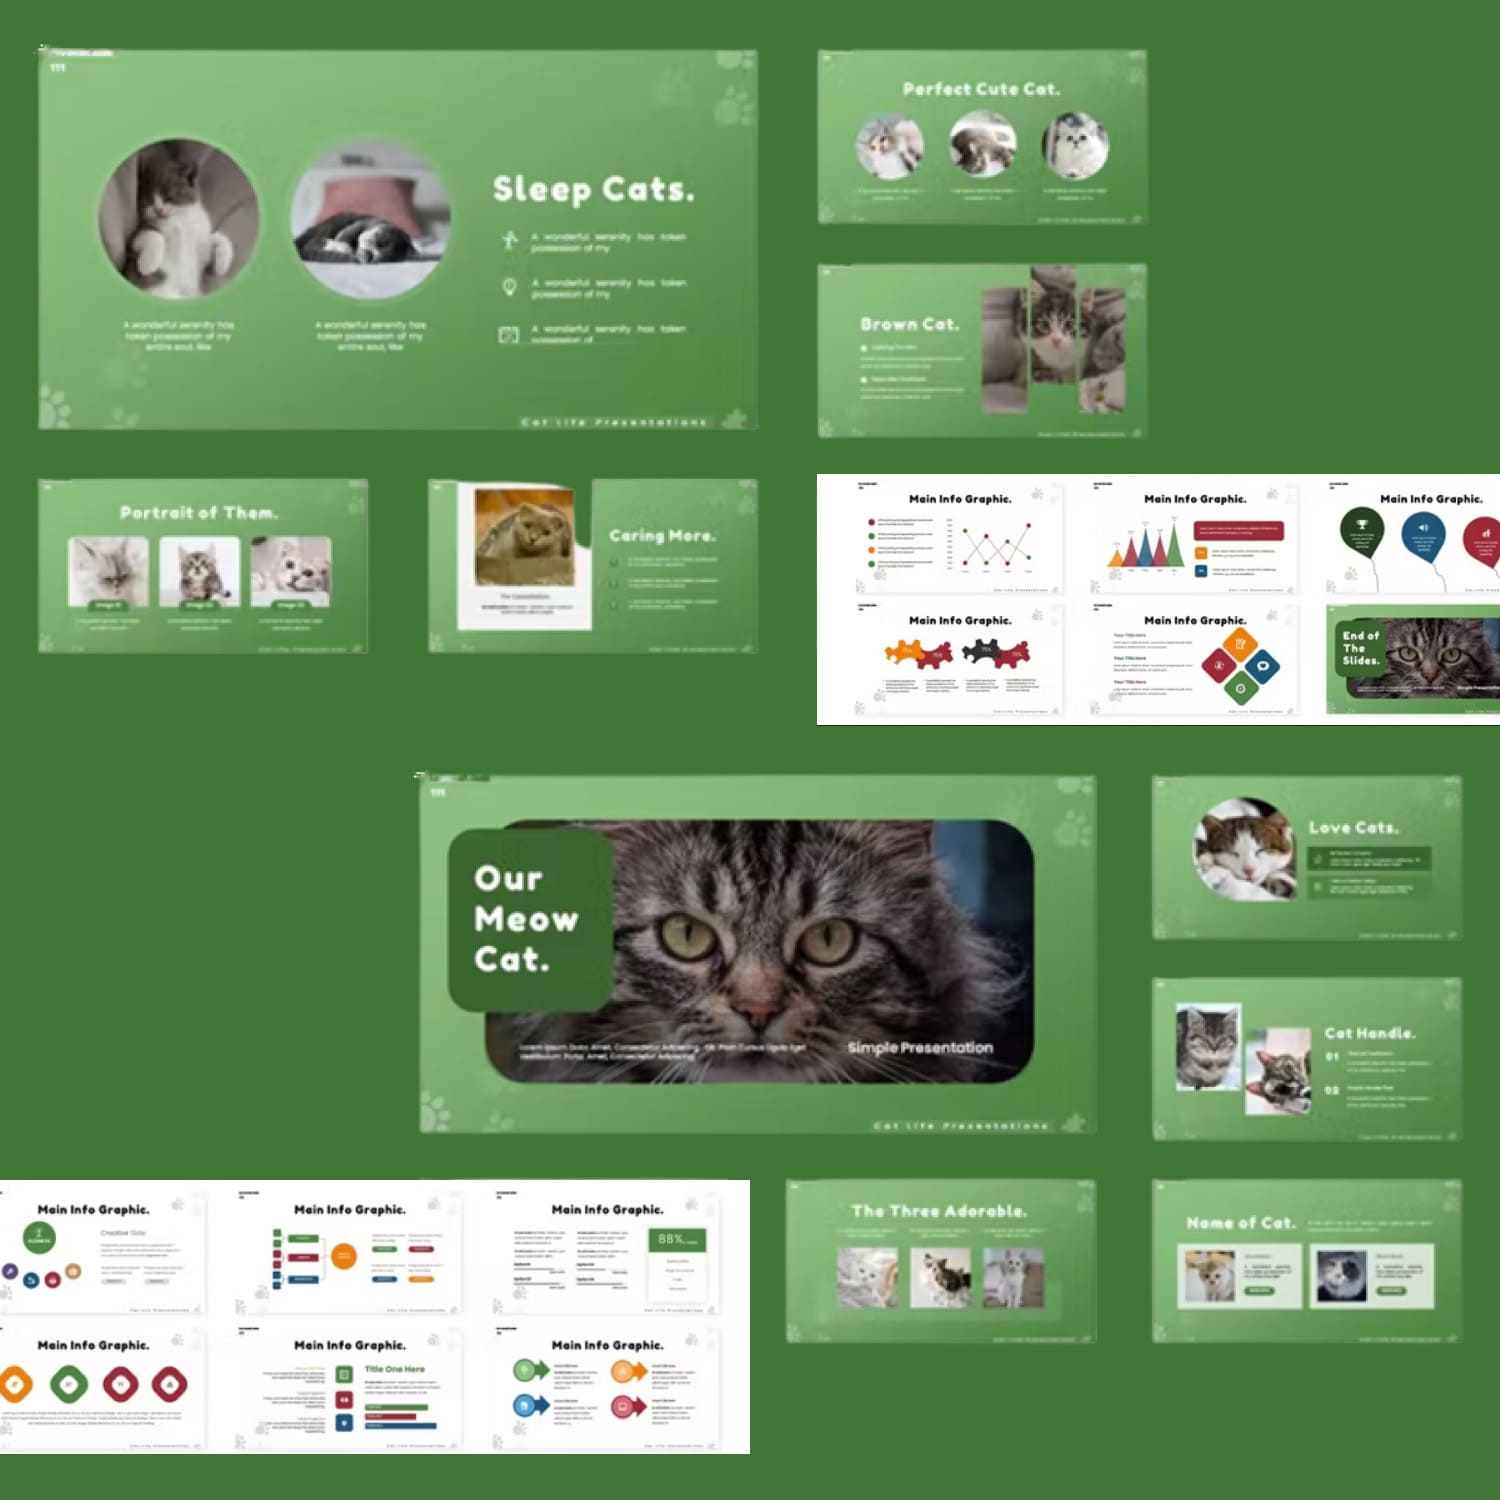 Our meow cat powerpoint template from karkunstudio.